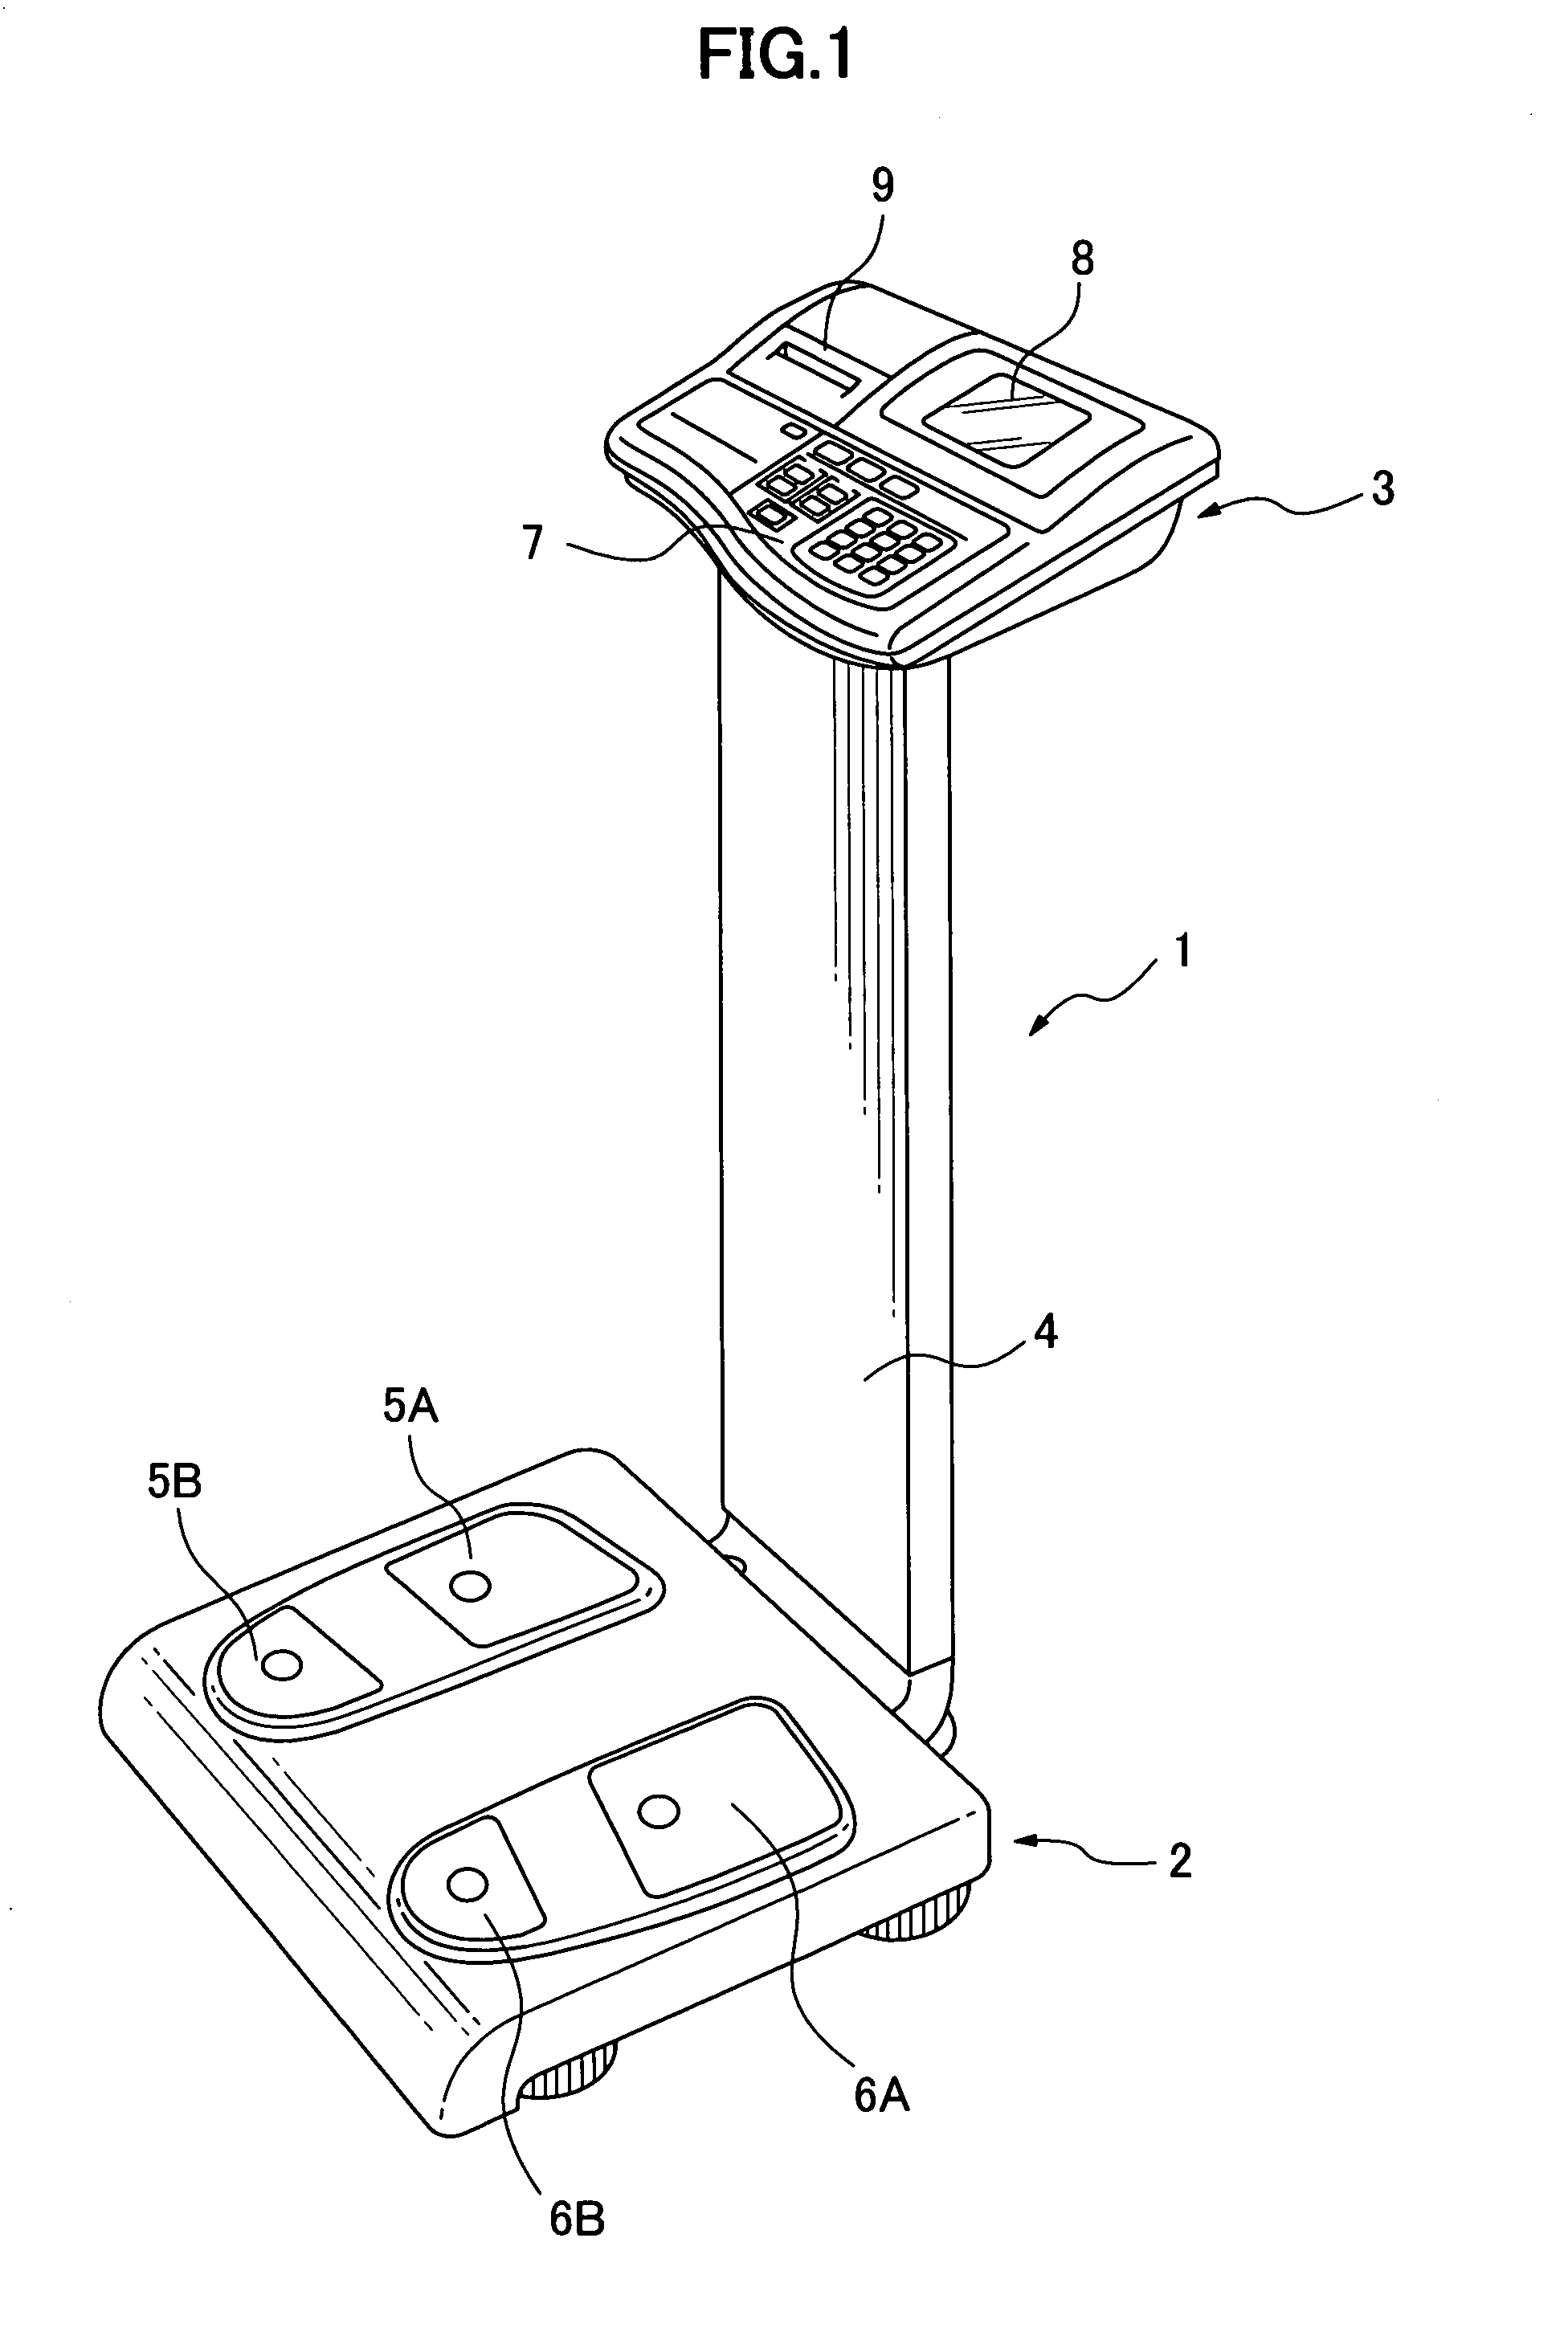 Body composition management apparatus for pregnant woman